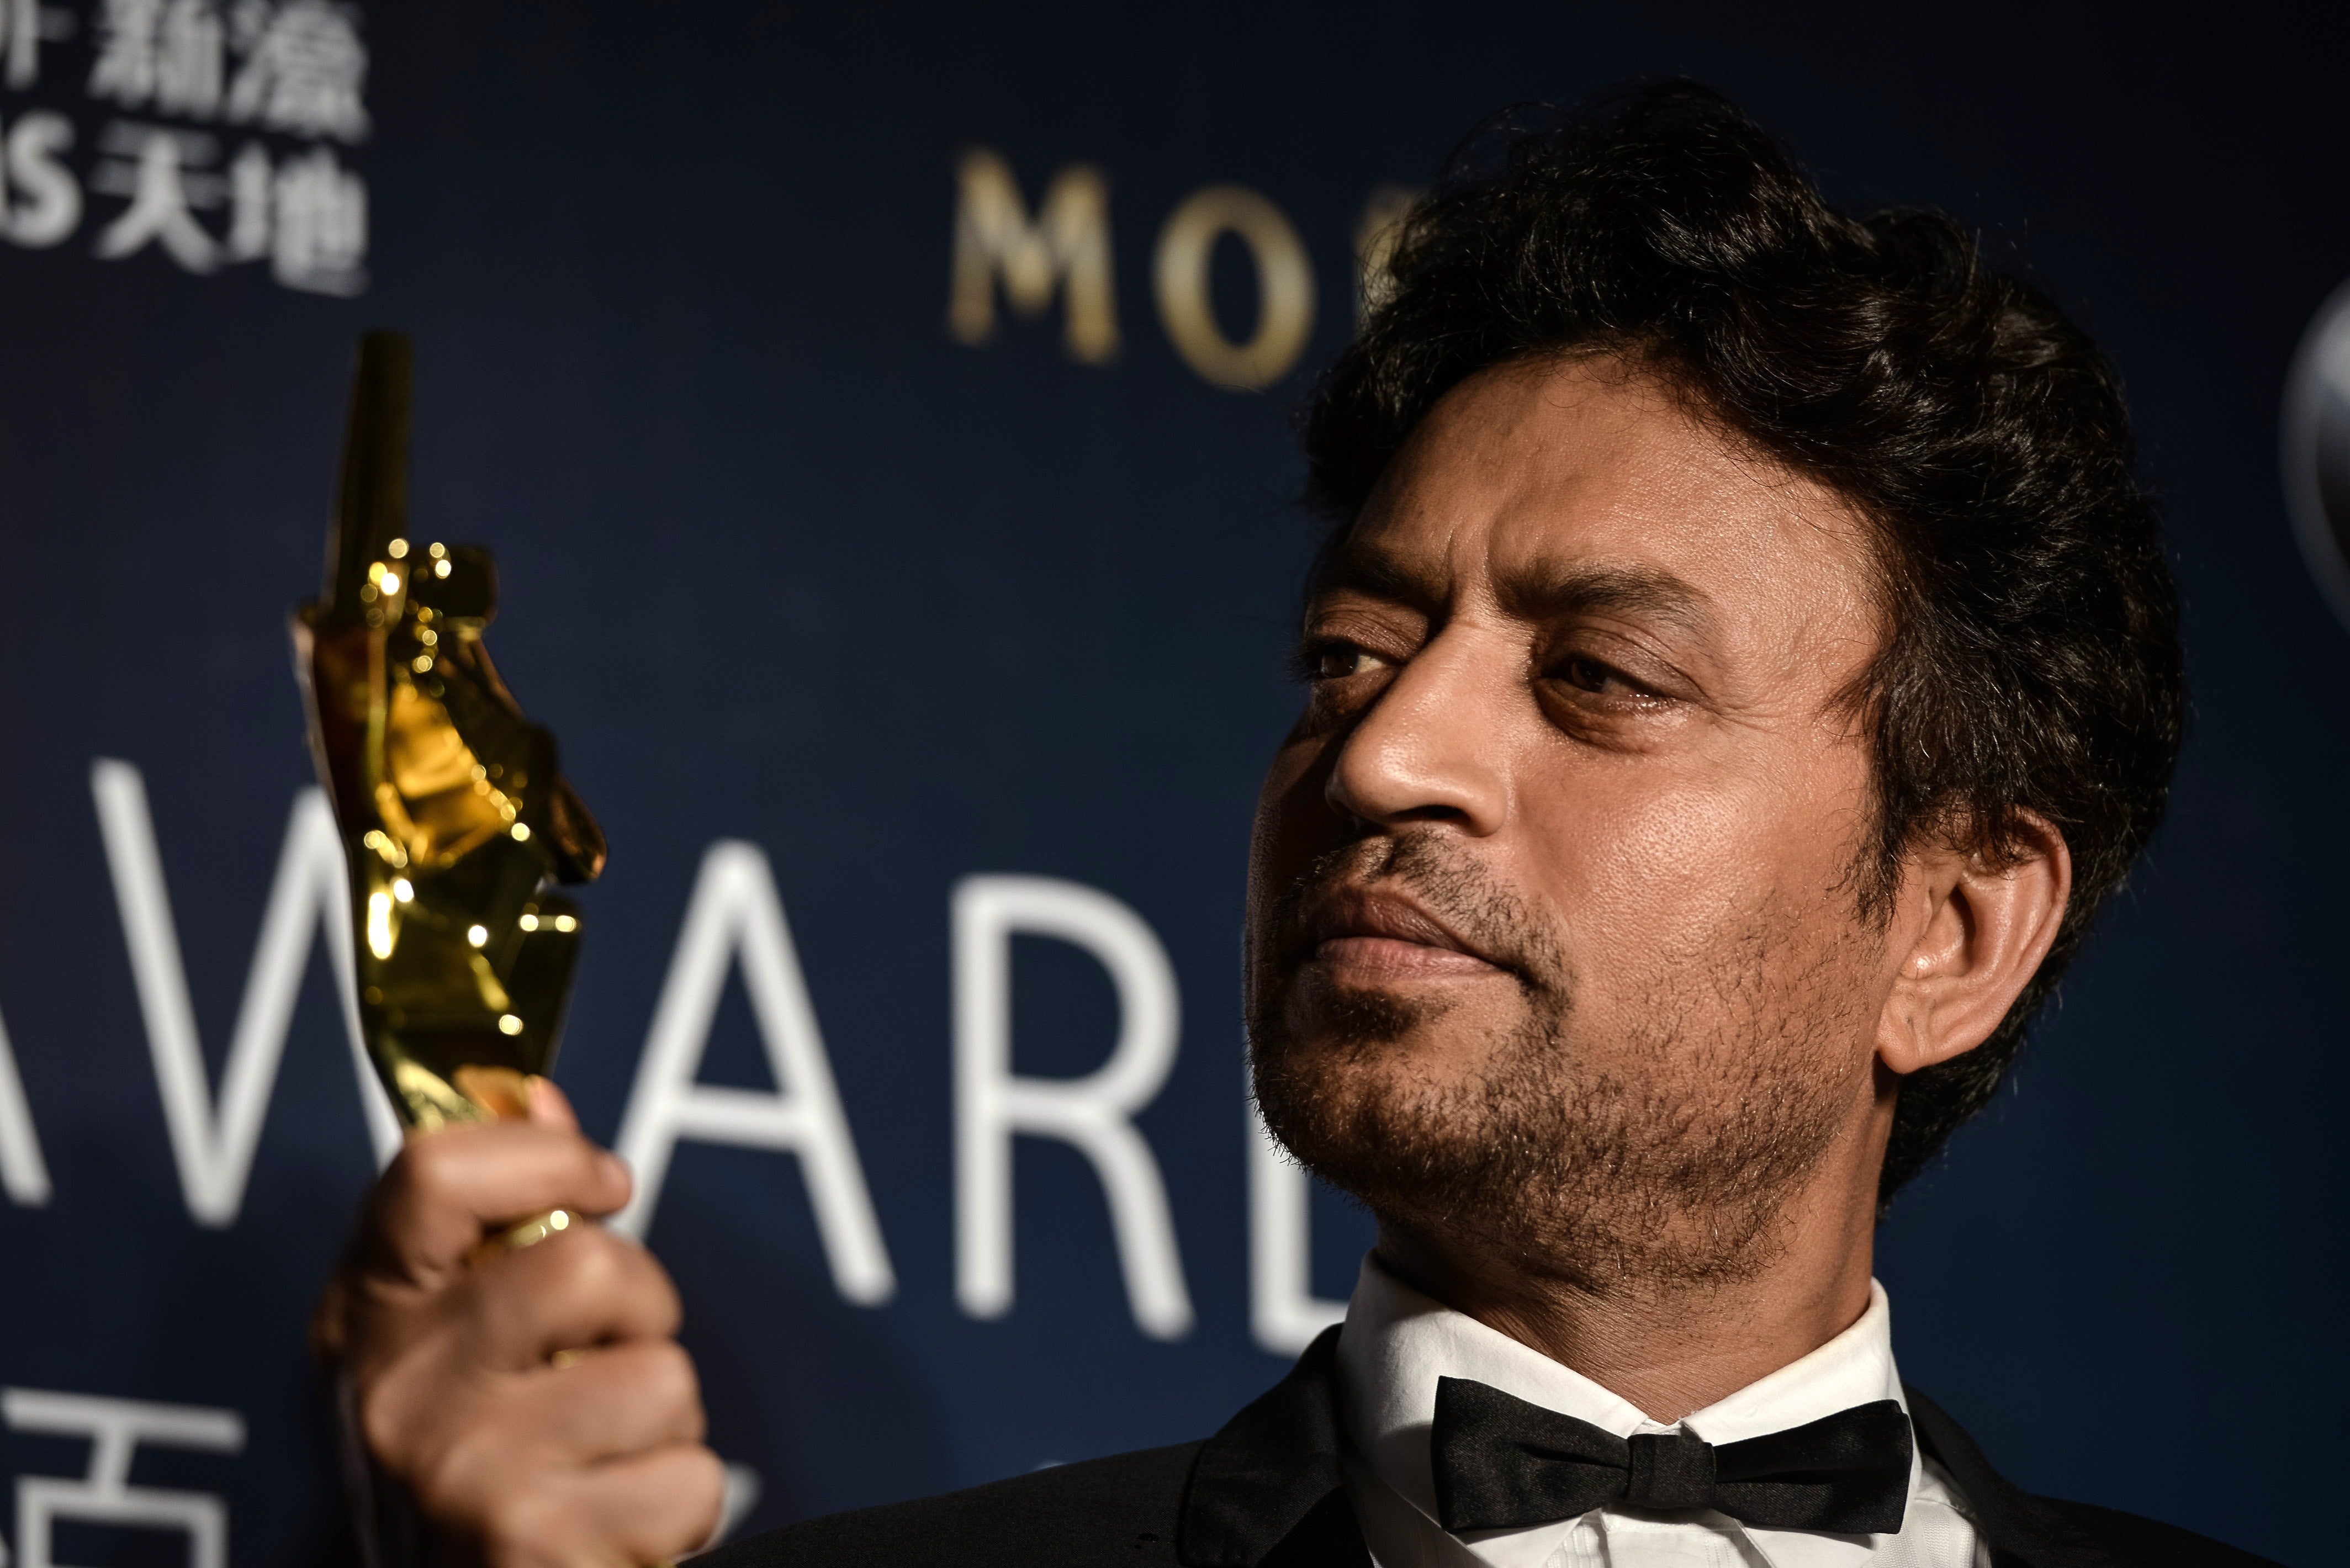 File image: Irrfan Khan poses with his trophy during the Asian Film Awards in 2014